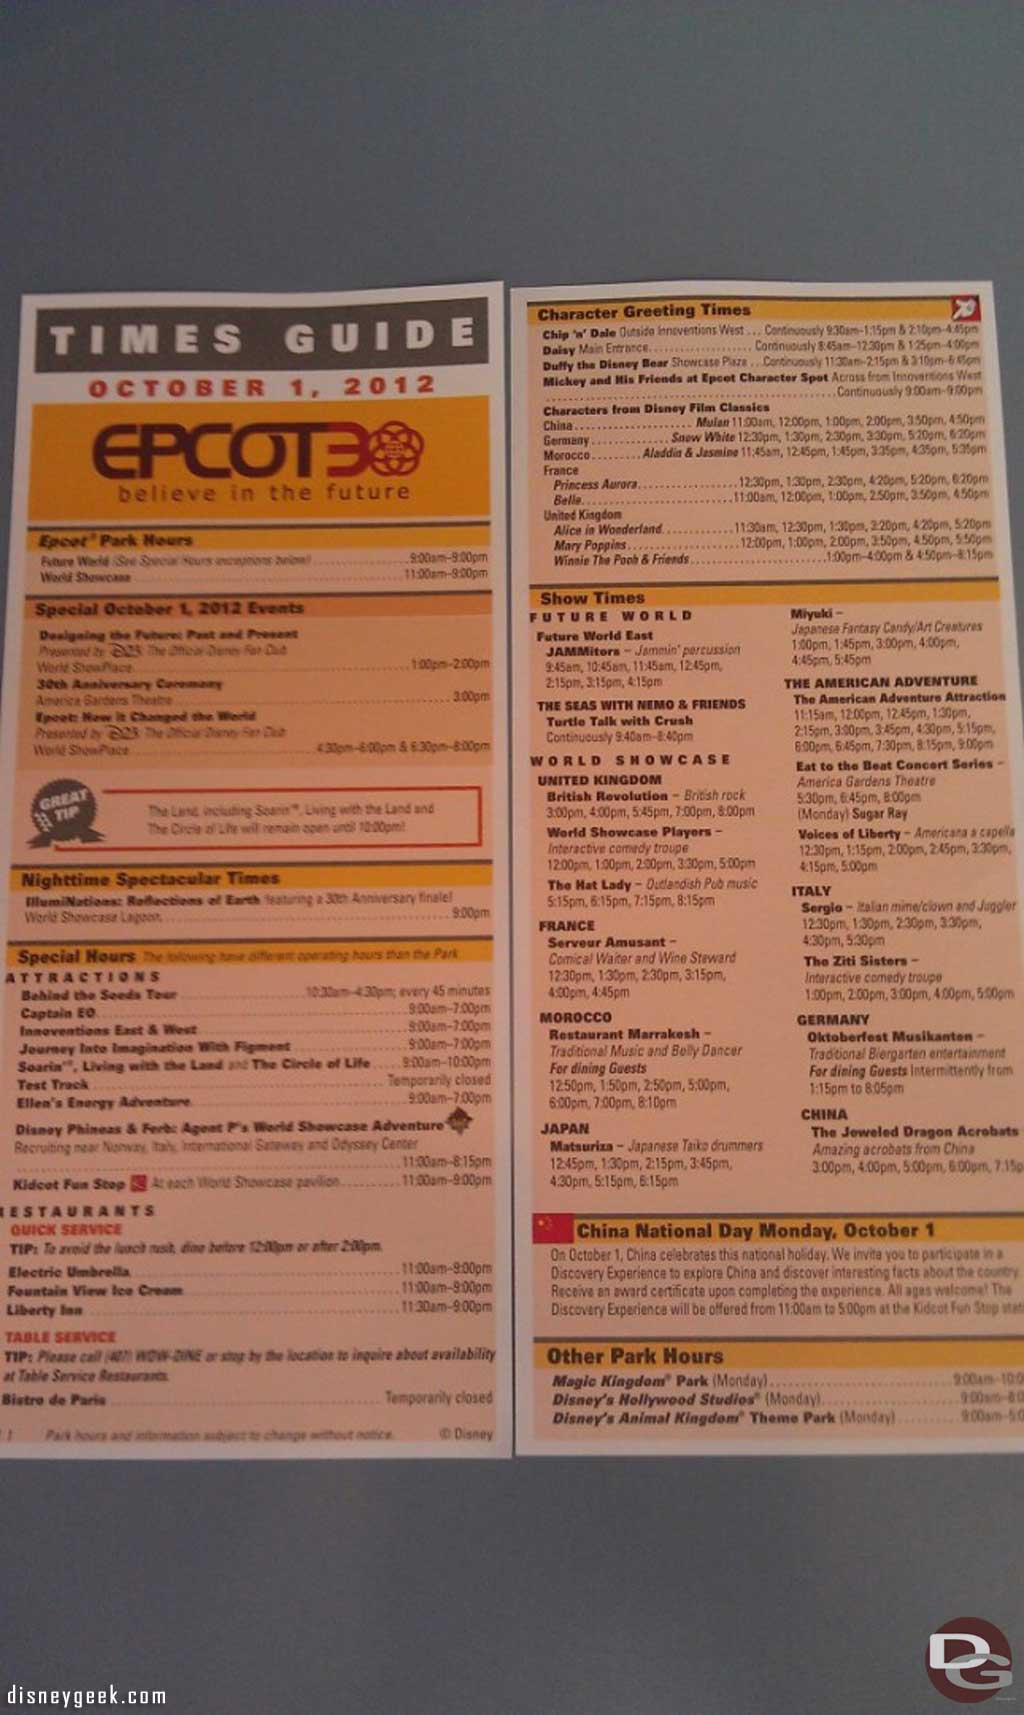 There is also an Epcot30 time guide just for today.